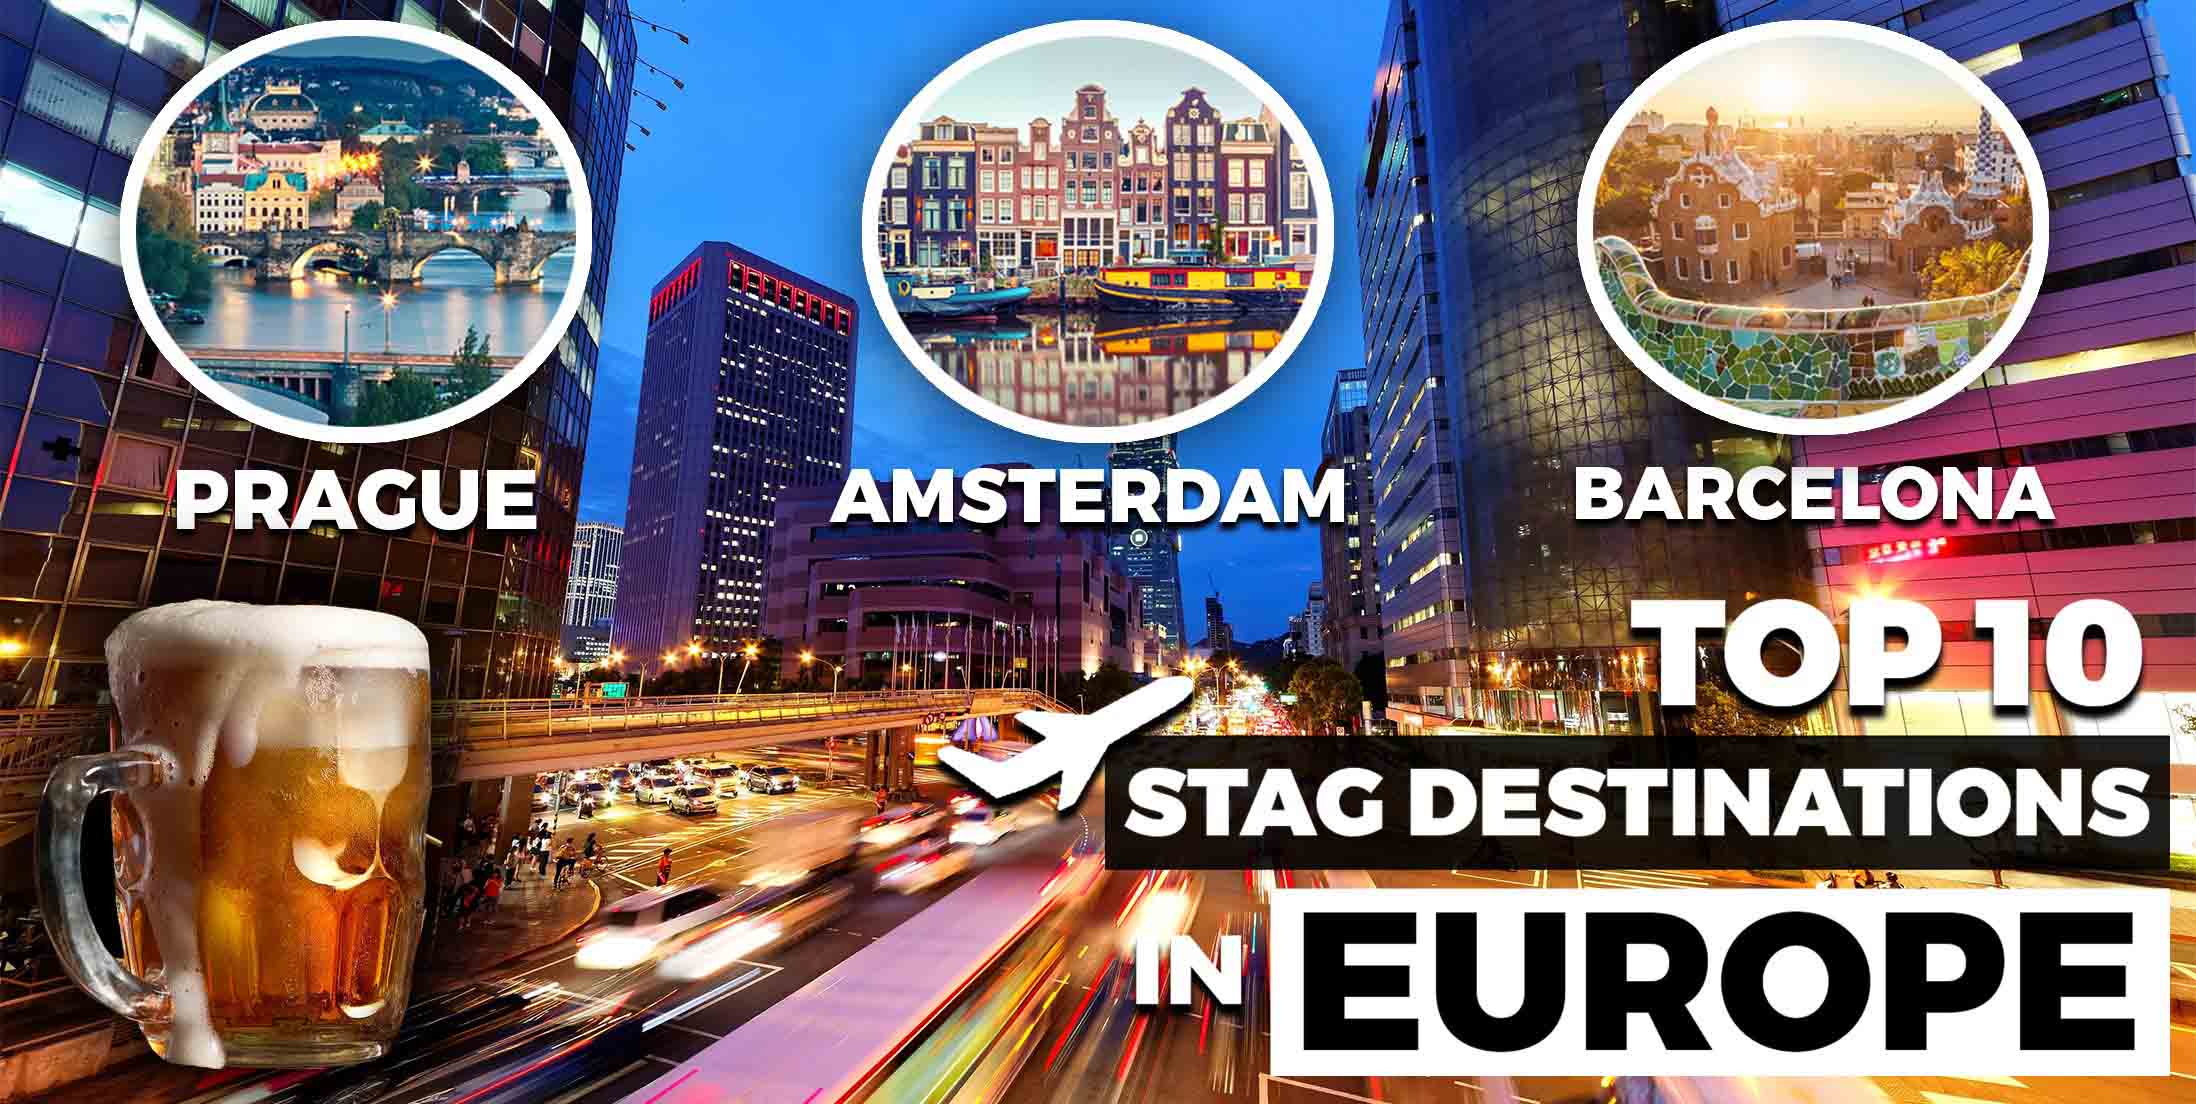 Top 10 Stag Destinations in Europe